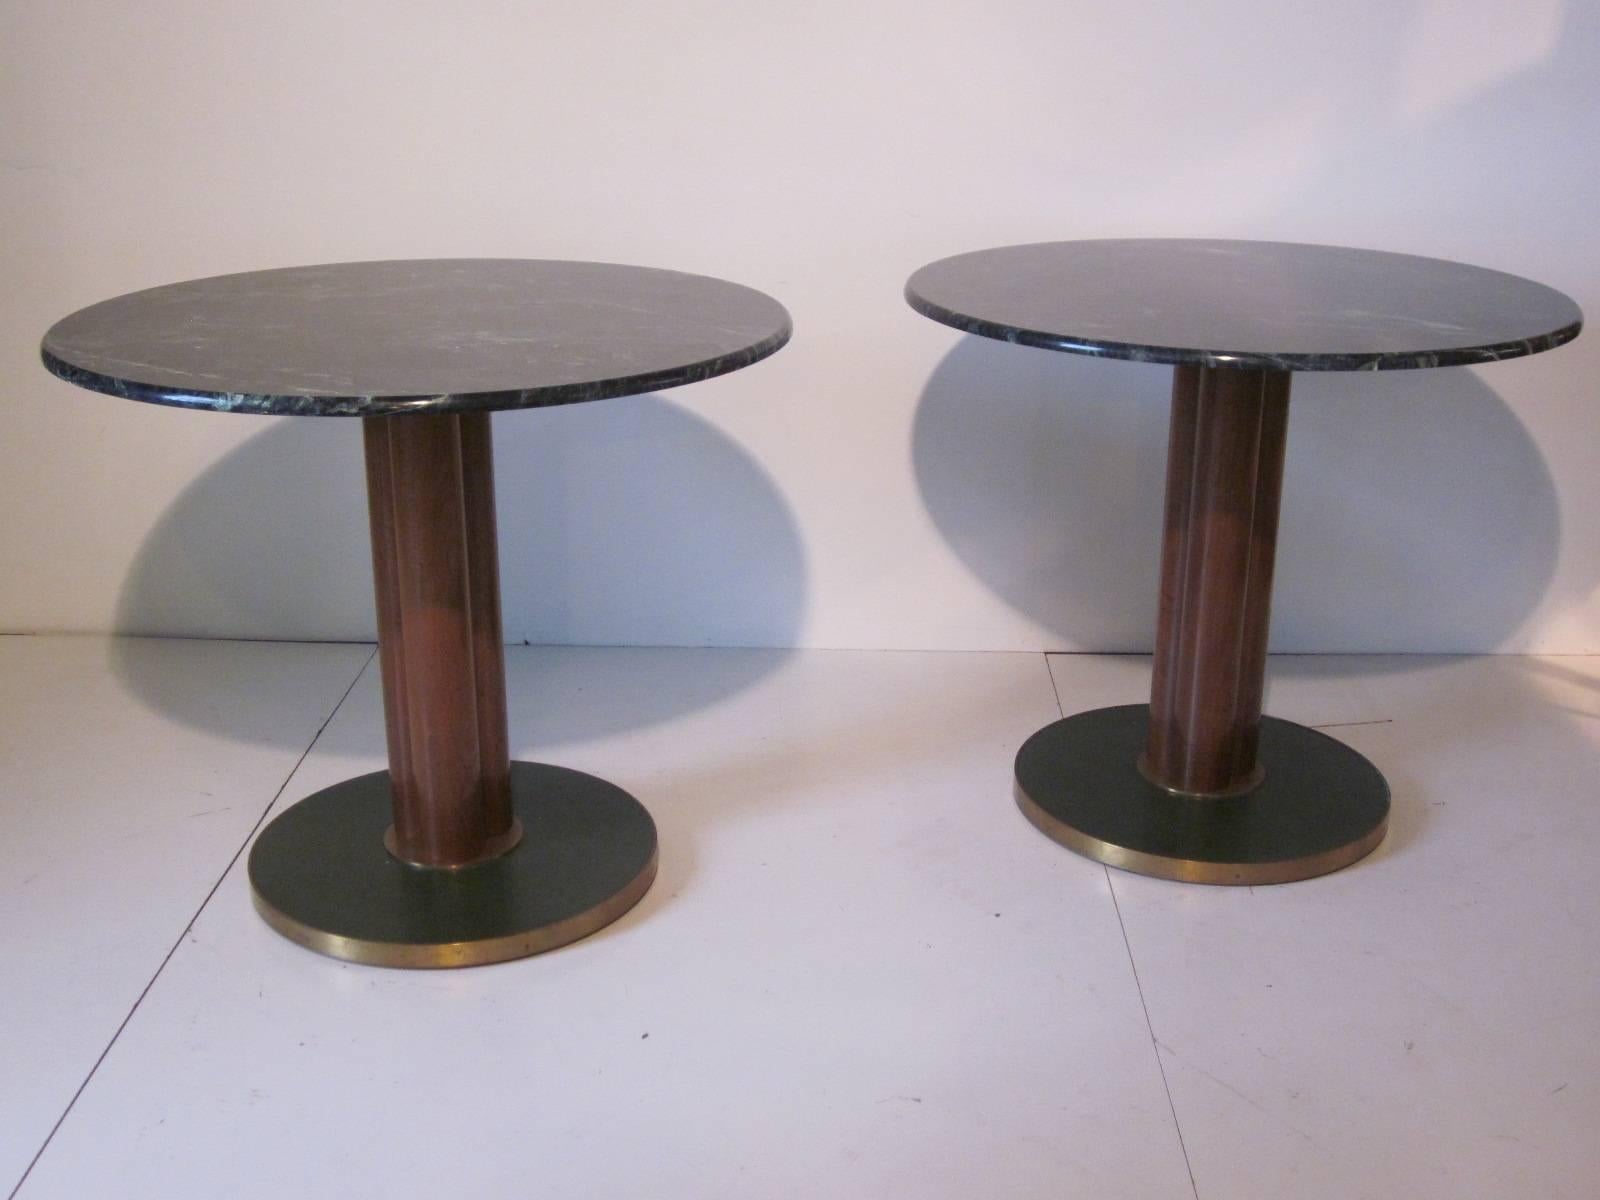 20th Century Edward Wormley for Dunbar Game or Dining Tables